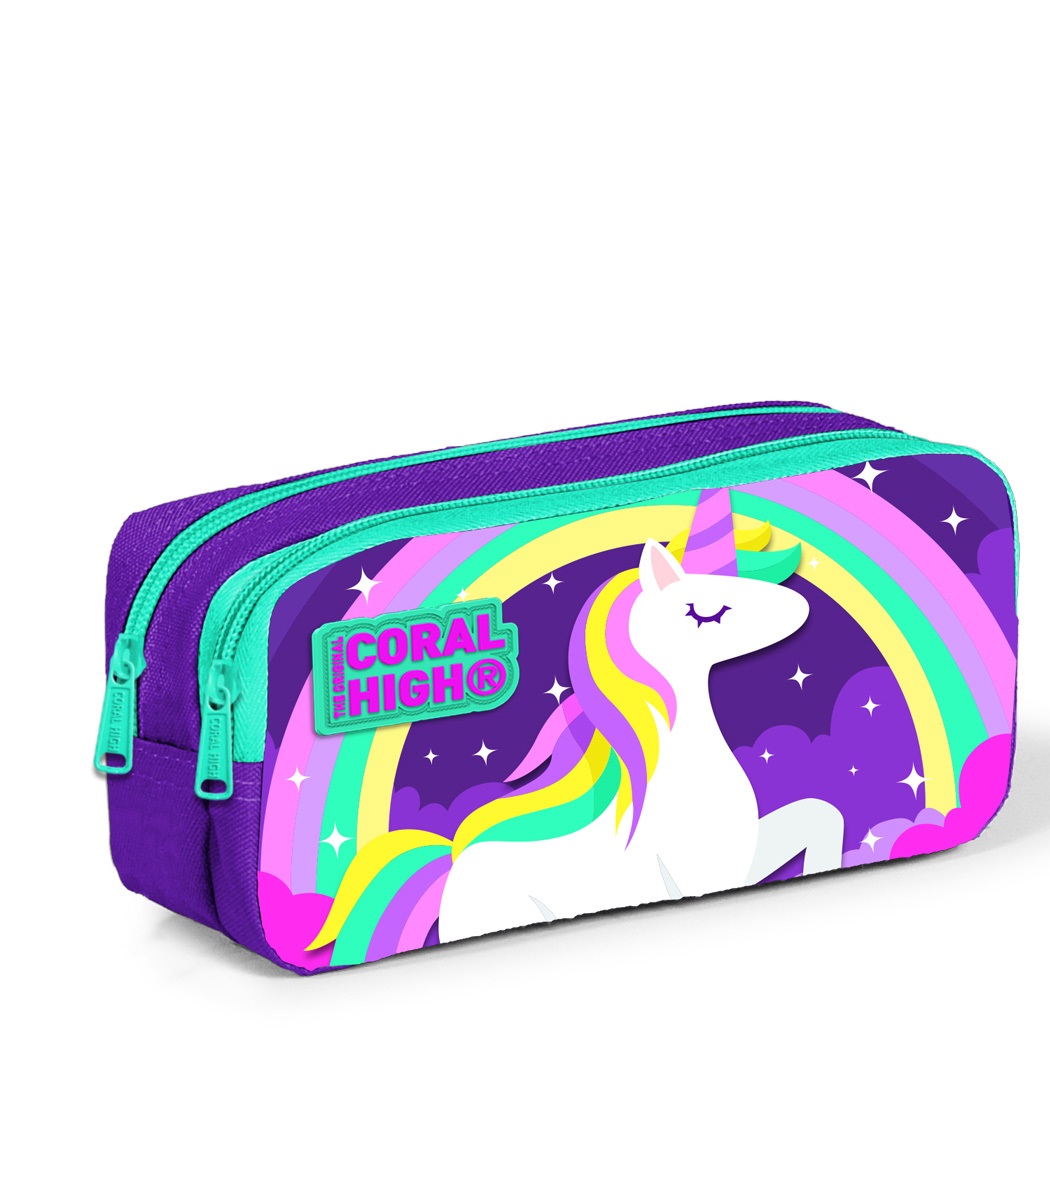 Coral High Kids Two Compartment Pencil case - Purple Water Green Unicorn Patterned